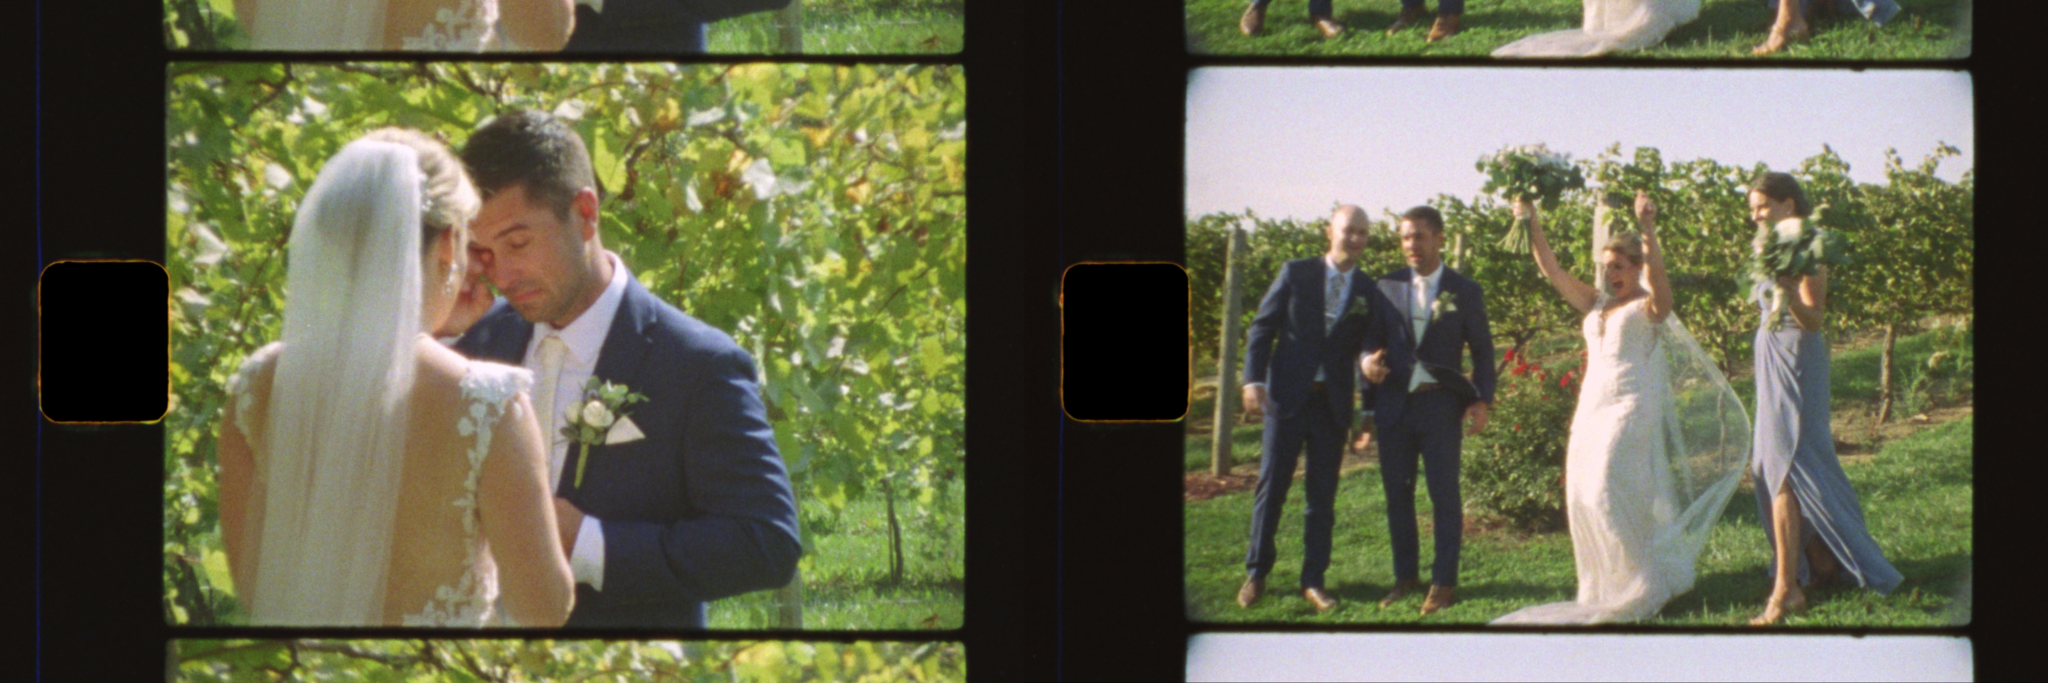 super 8 stills of a Minnesota vineyard wedding first look and just married celebrating